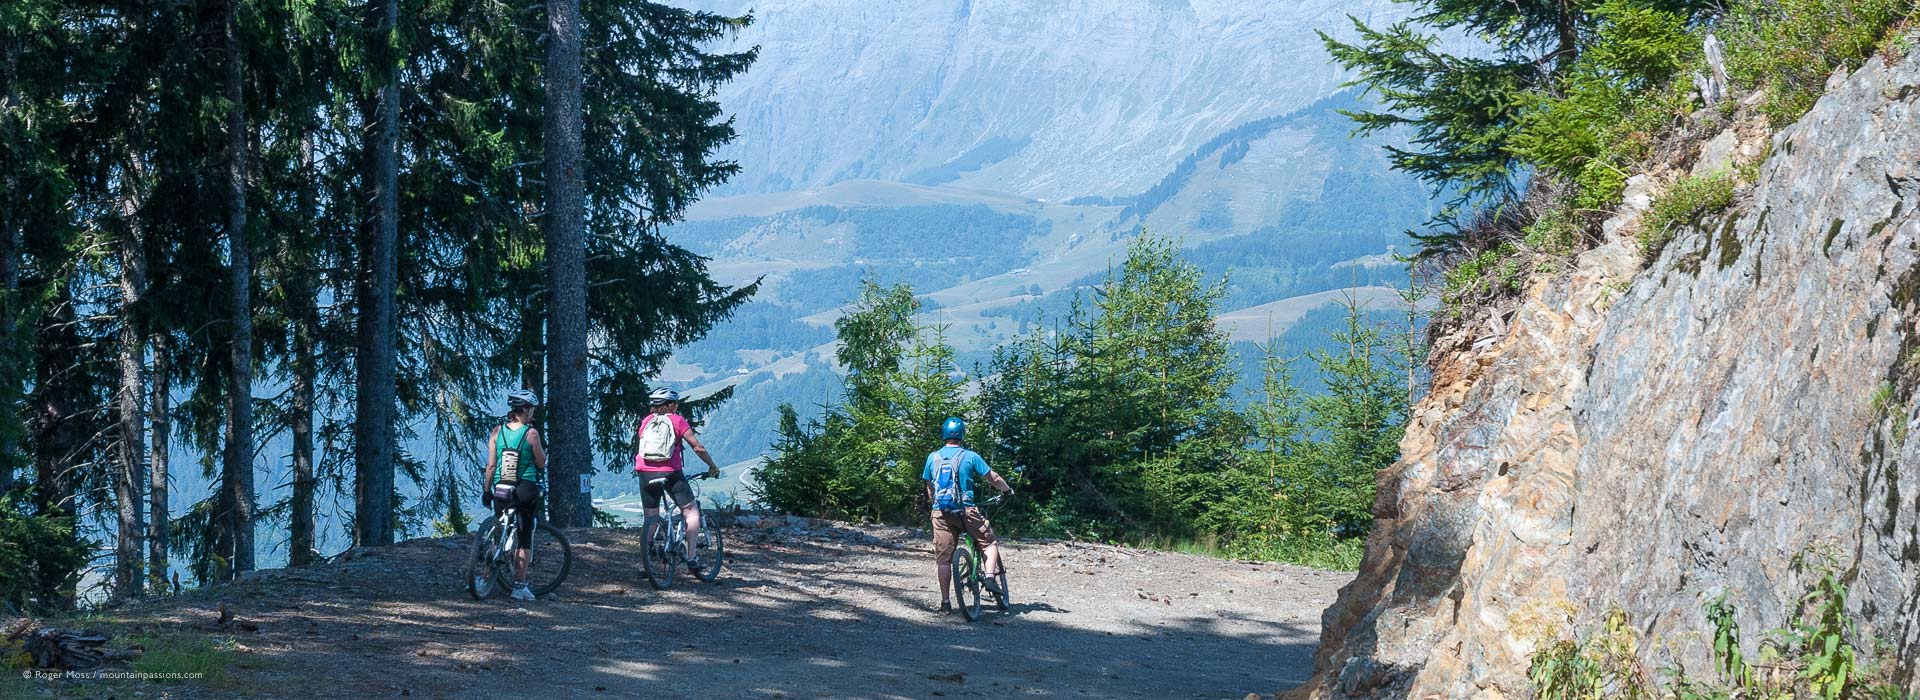 Wide view of mountain bikers leaving forest trail with mountain view ahead